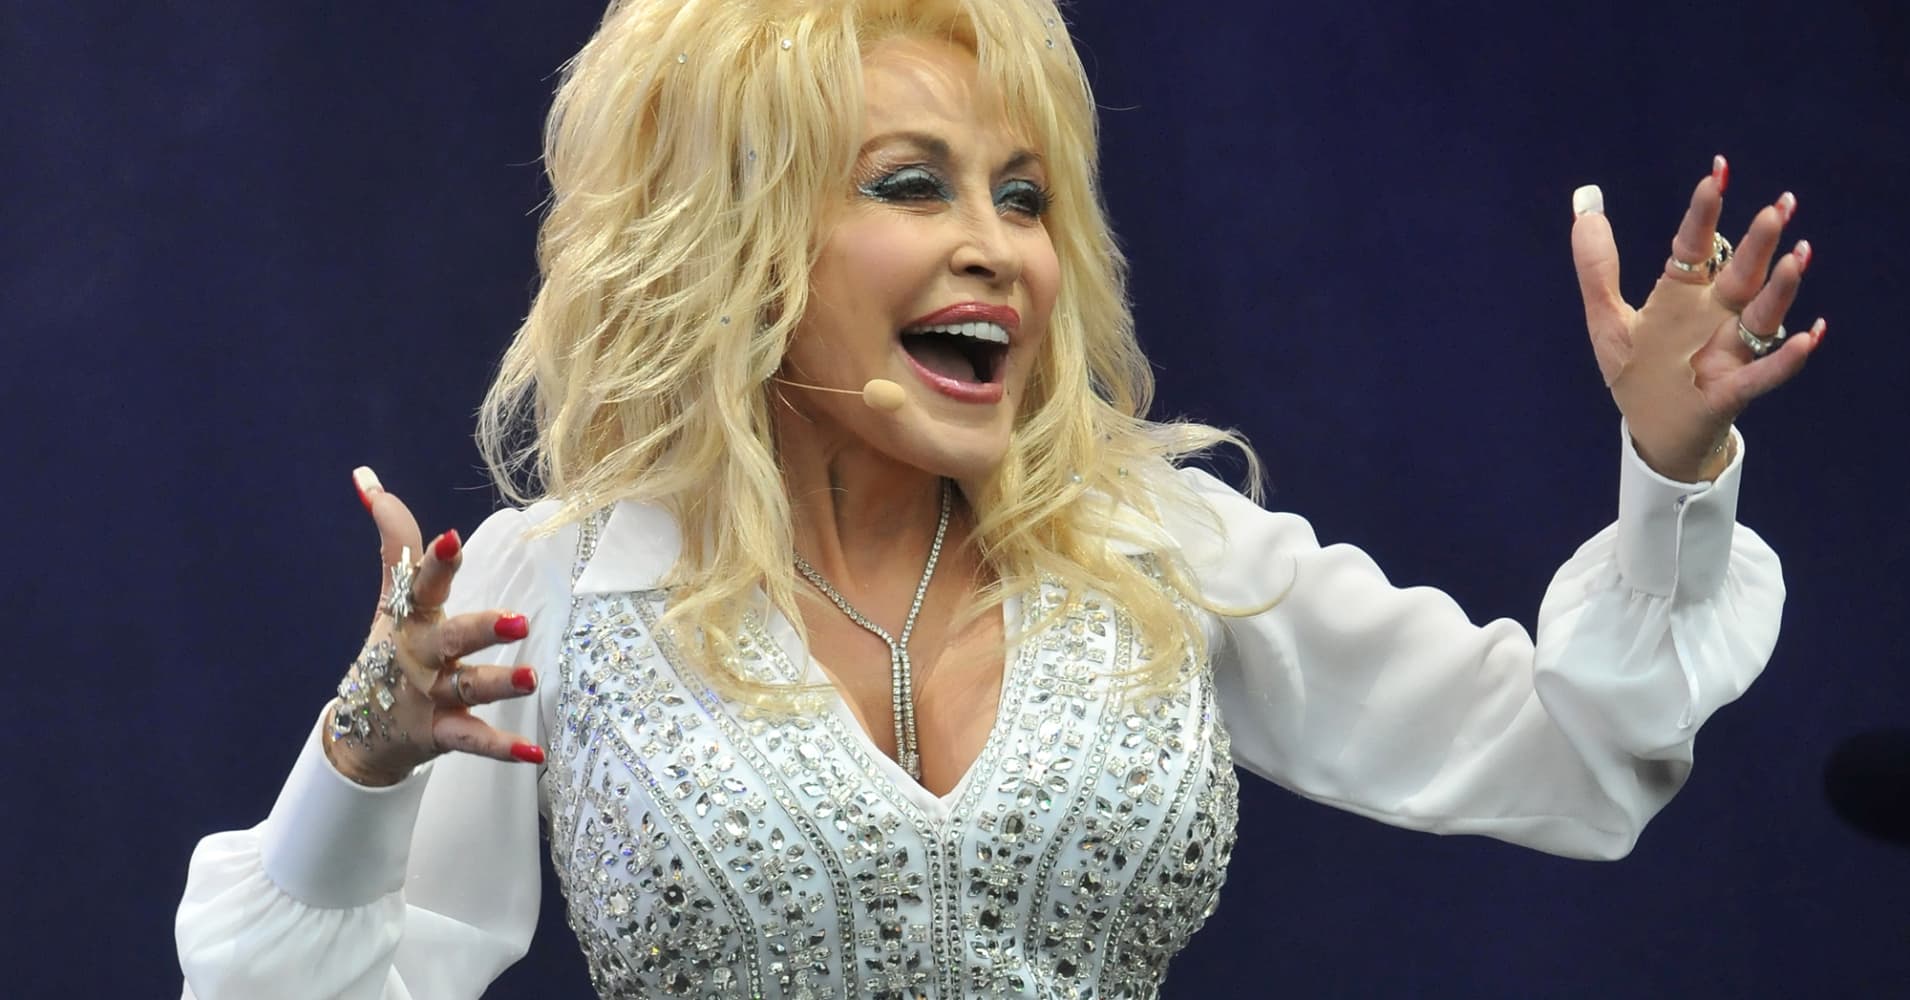 Dolly Parton opens new resort after $300M investment1910 x 1000